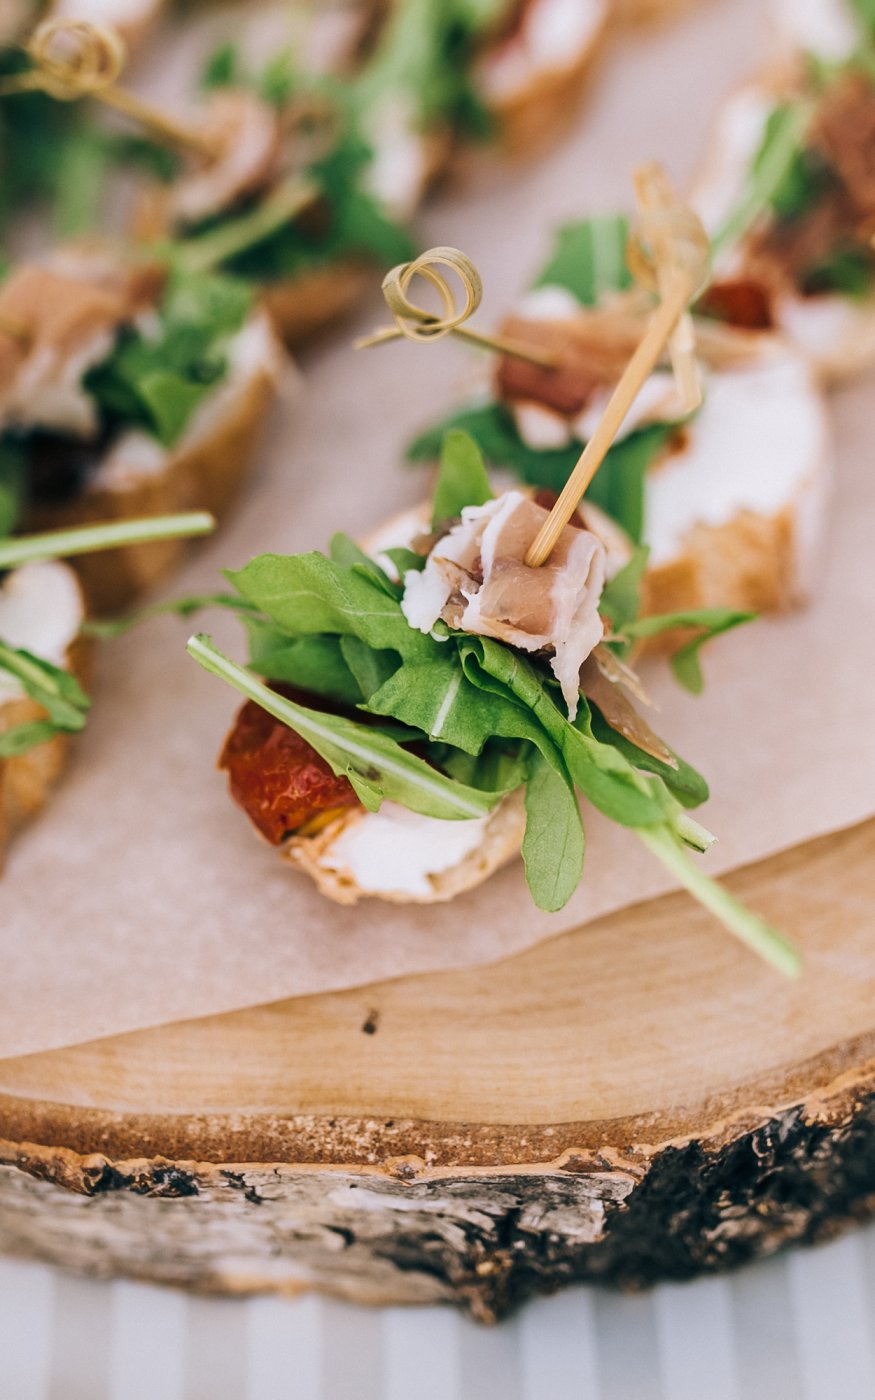 Parma ham, rocket and scallop skewers presented on a rustic sawn tree stump